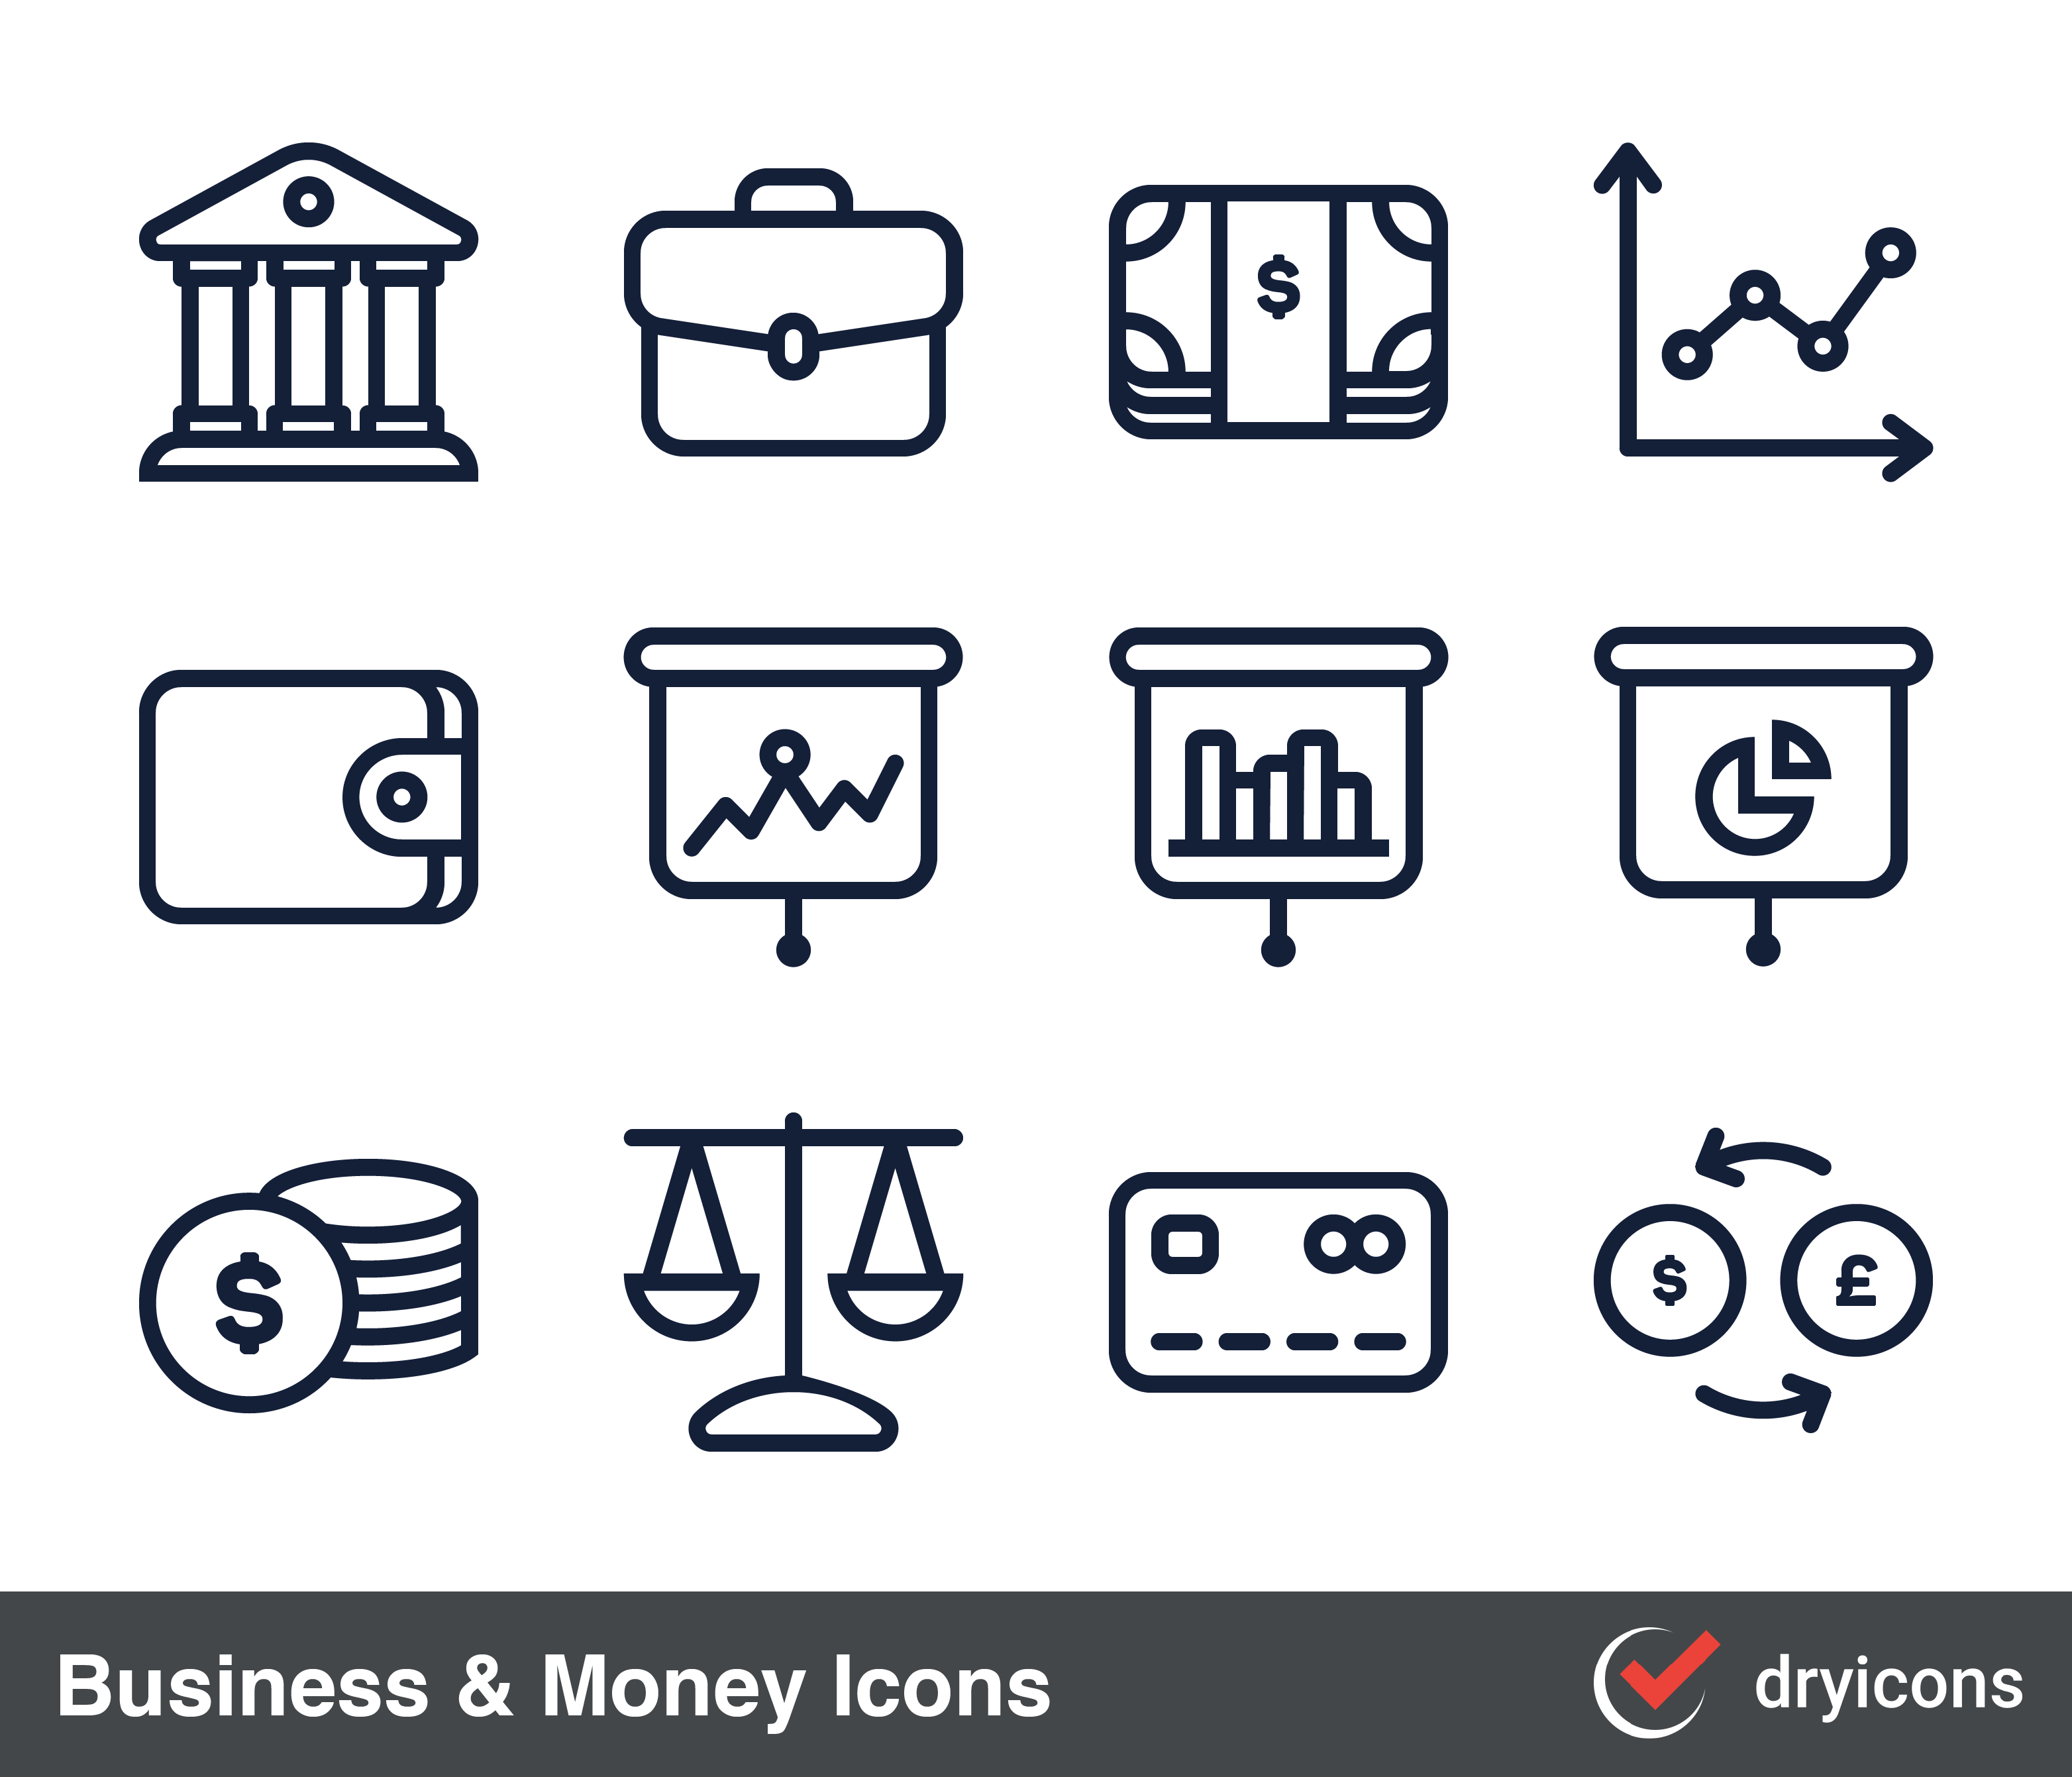 Free icons designed by Google | Flaticon